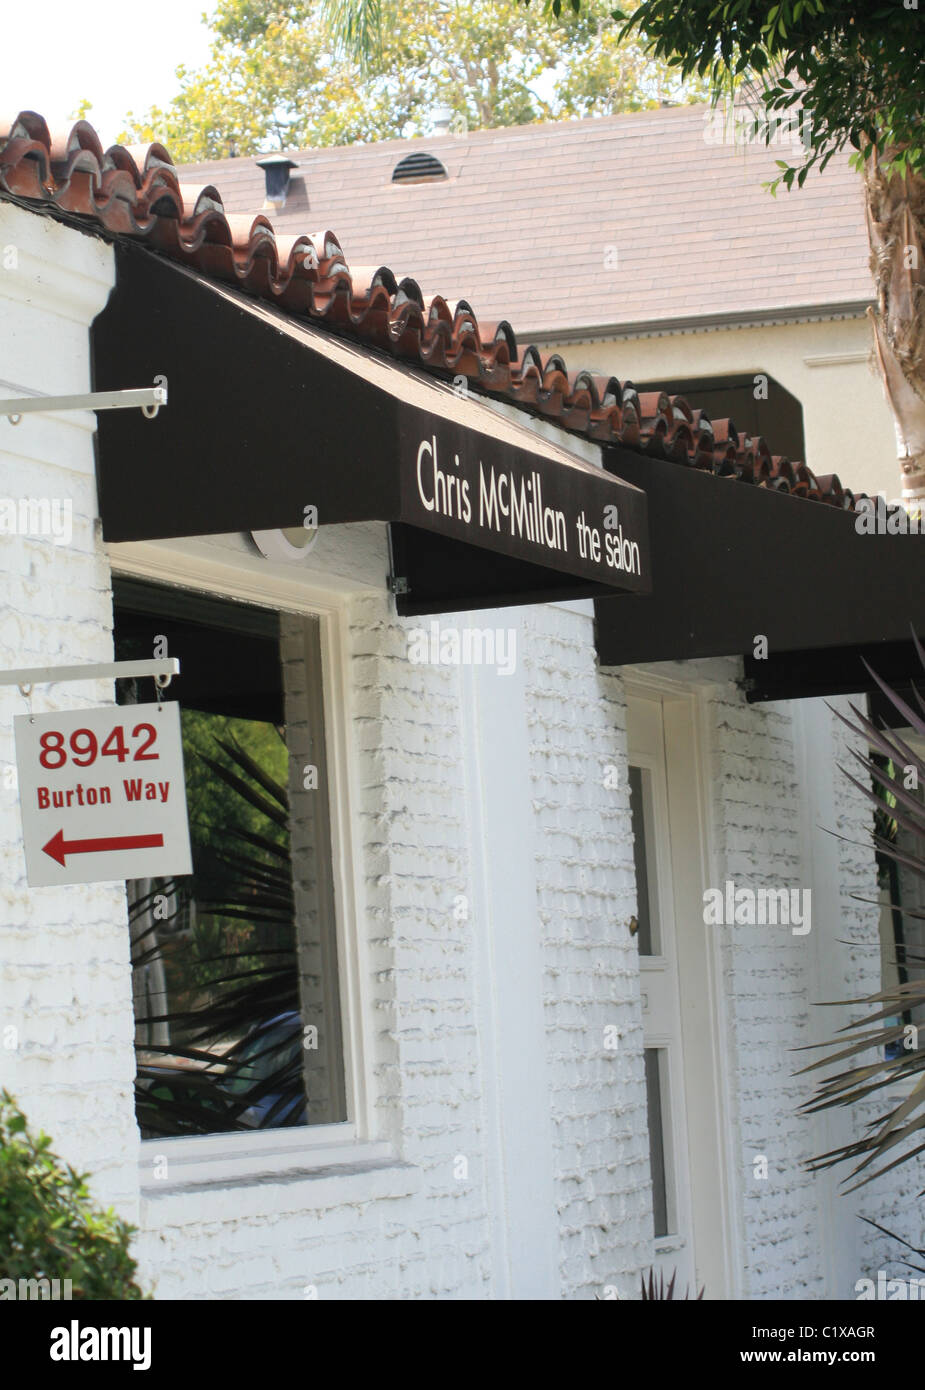 General View of Chris McMillan hair salon in Beverly Hills Los Angeles,  California, USA - 22.08.09 Stock Photo - Alamy